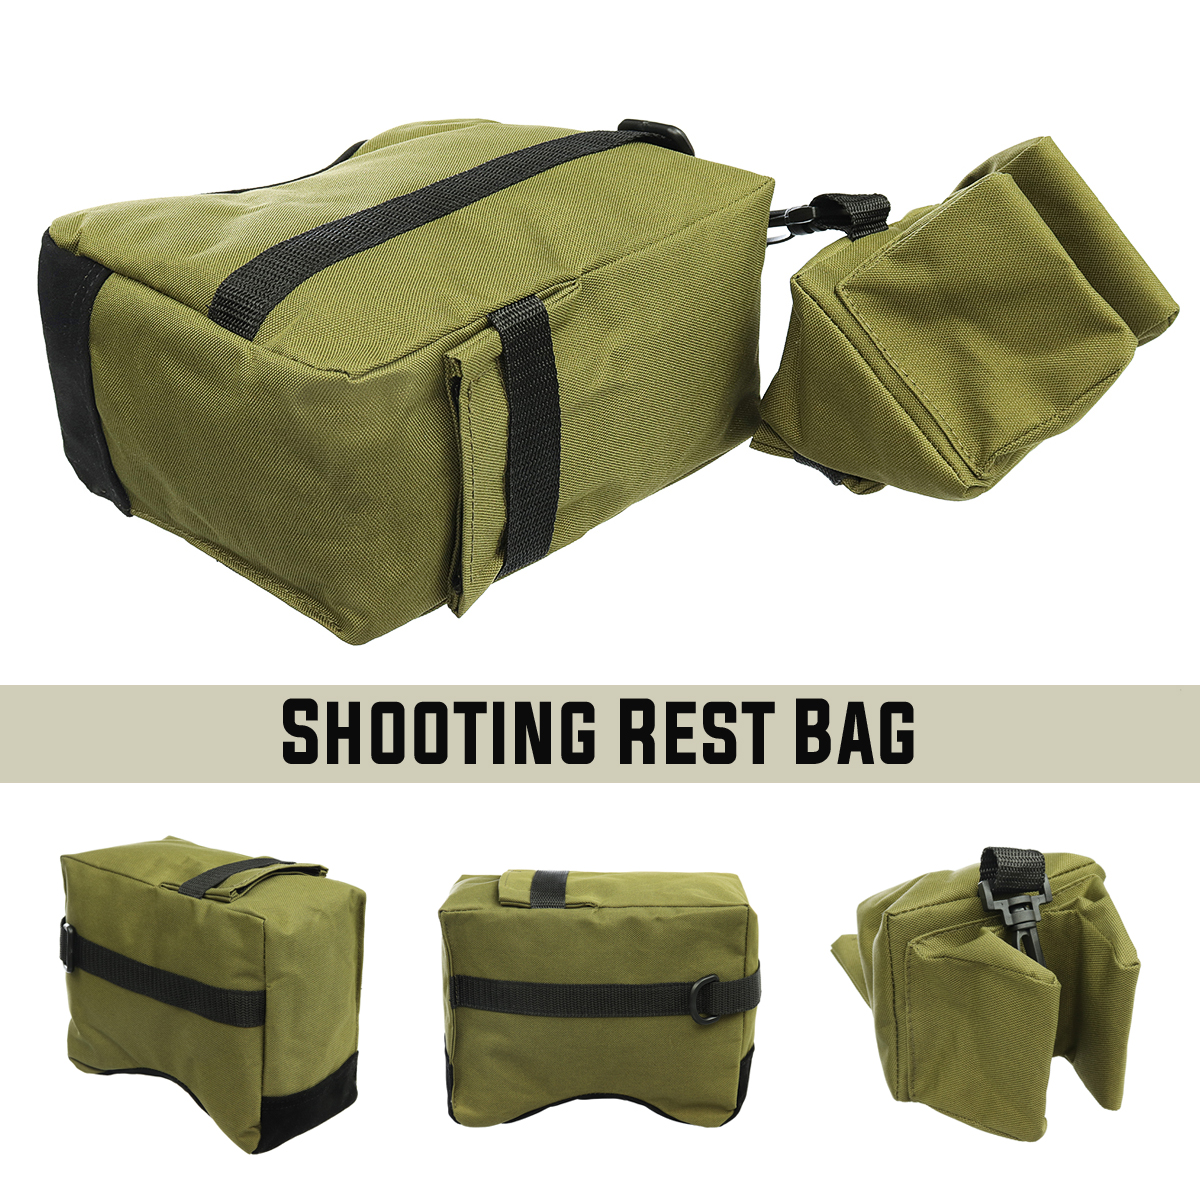 Front-Rear-Bag-Shooting-Sand-Bag-Gun-Photography-Bench-Rest-Stand-Holder-Hunting-Accessories-1339892-4